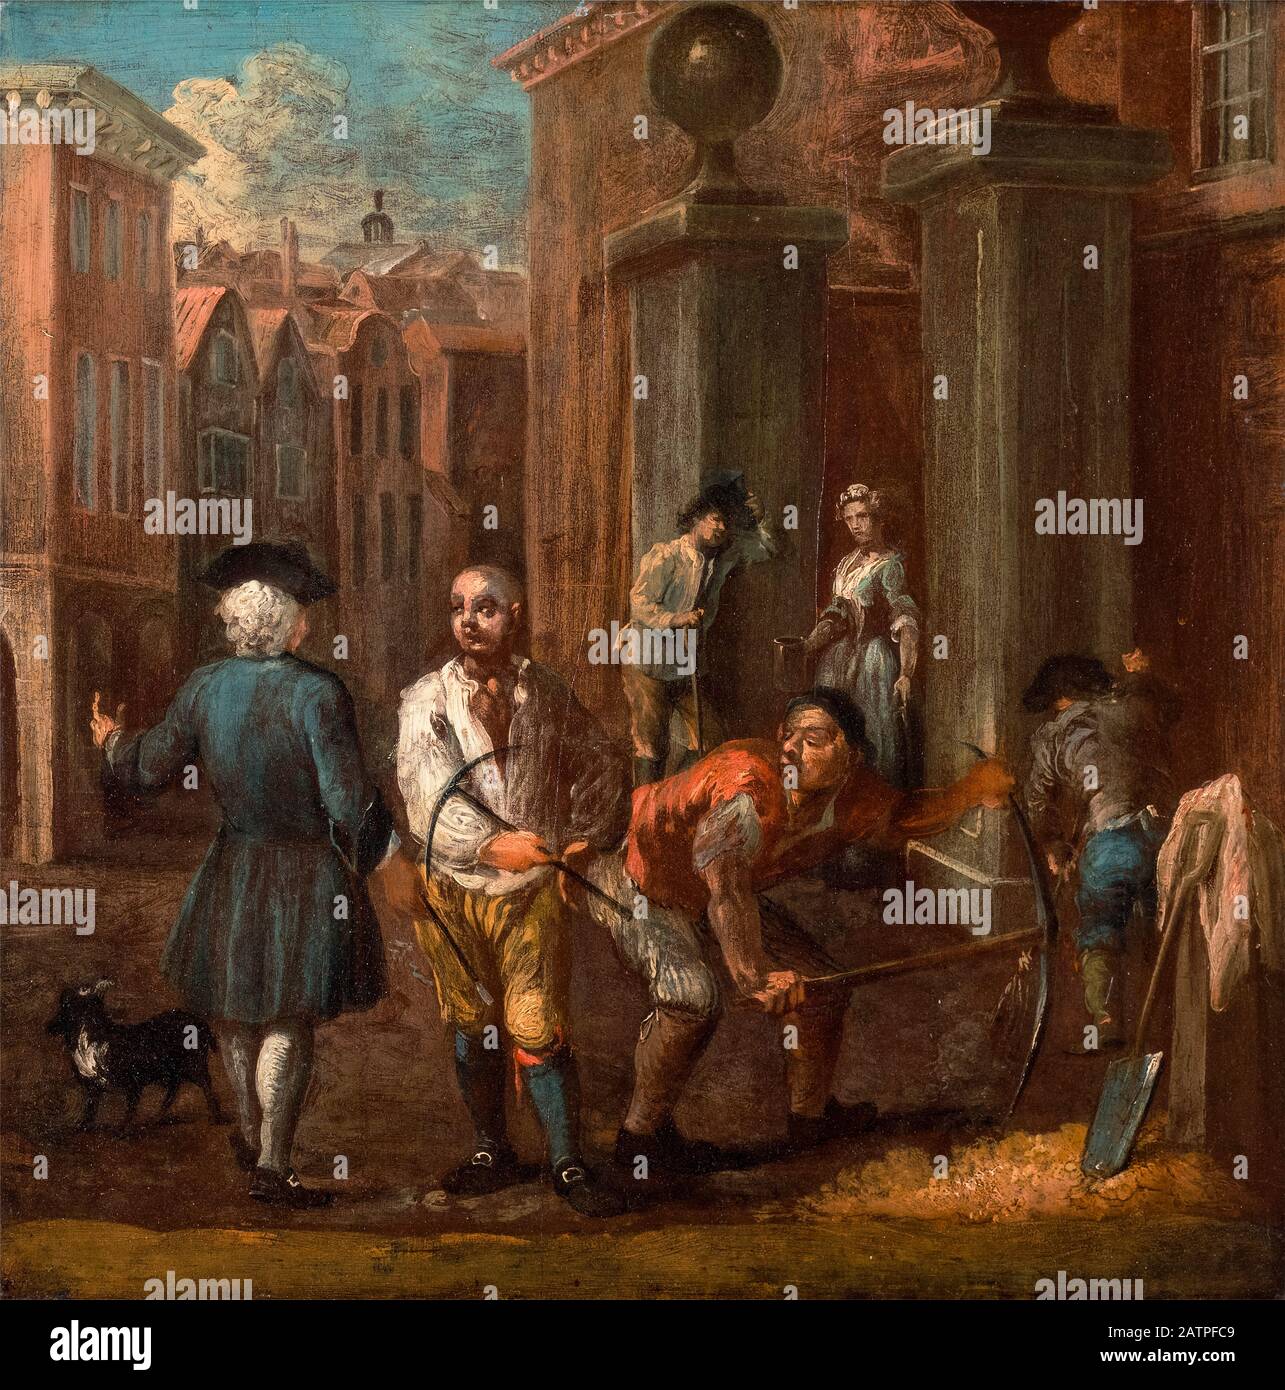 Sign for a paviour, painting by William Hogarth, circa 1725 Stock Photo